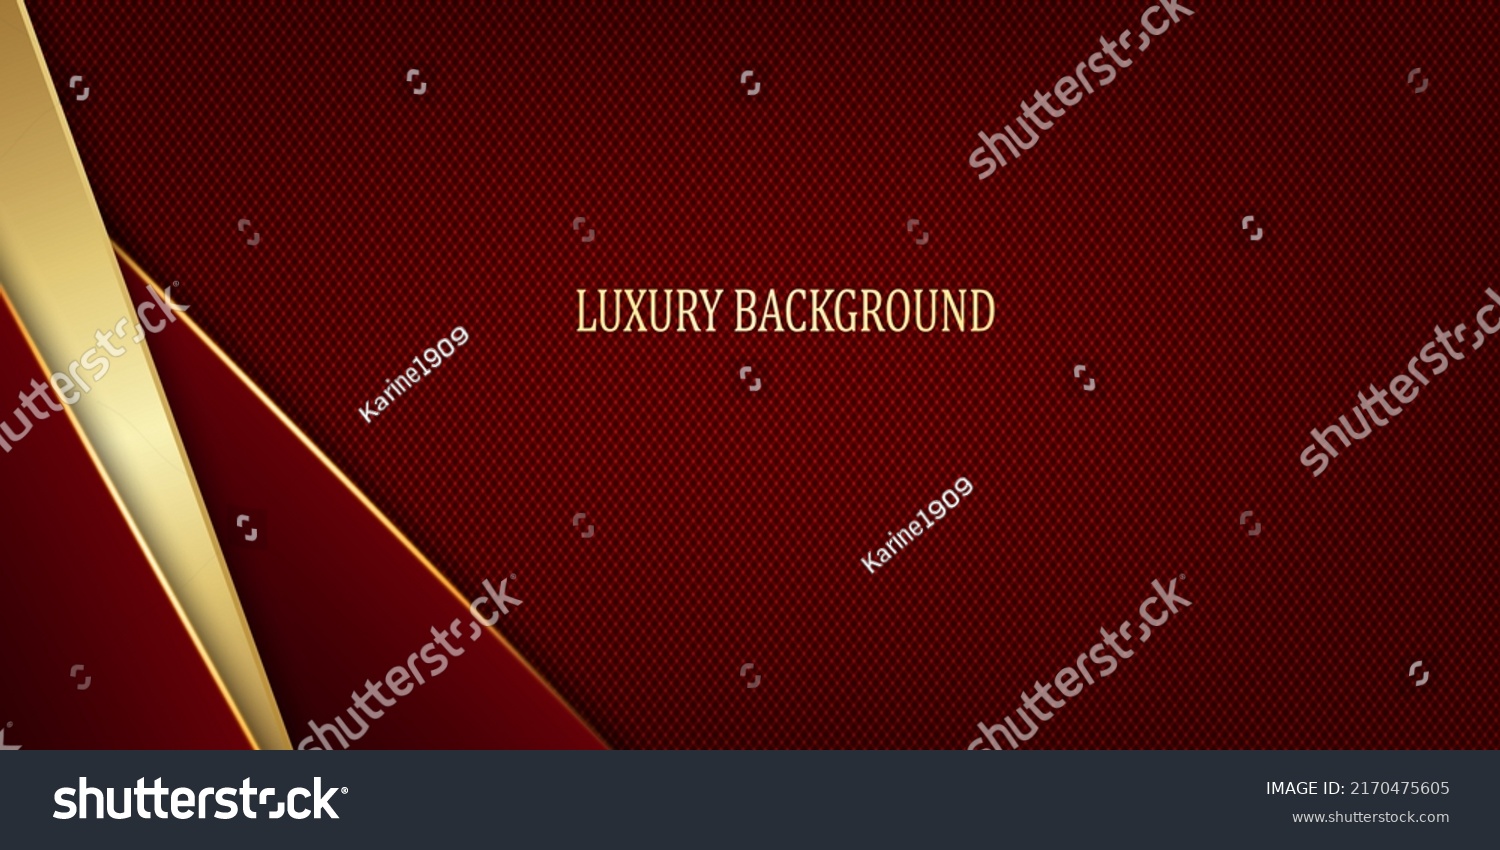 Red and gold luxury background. Vector illustration. #2170475605